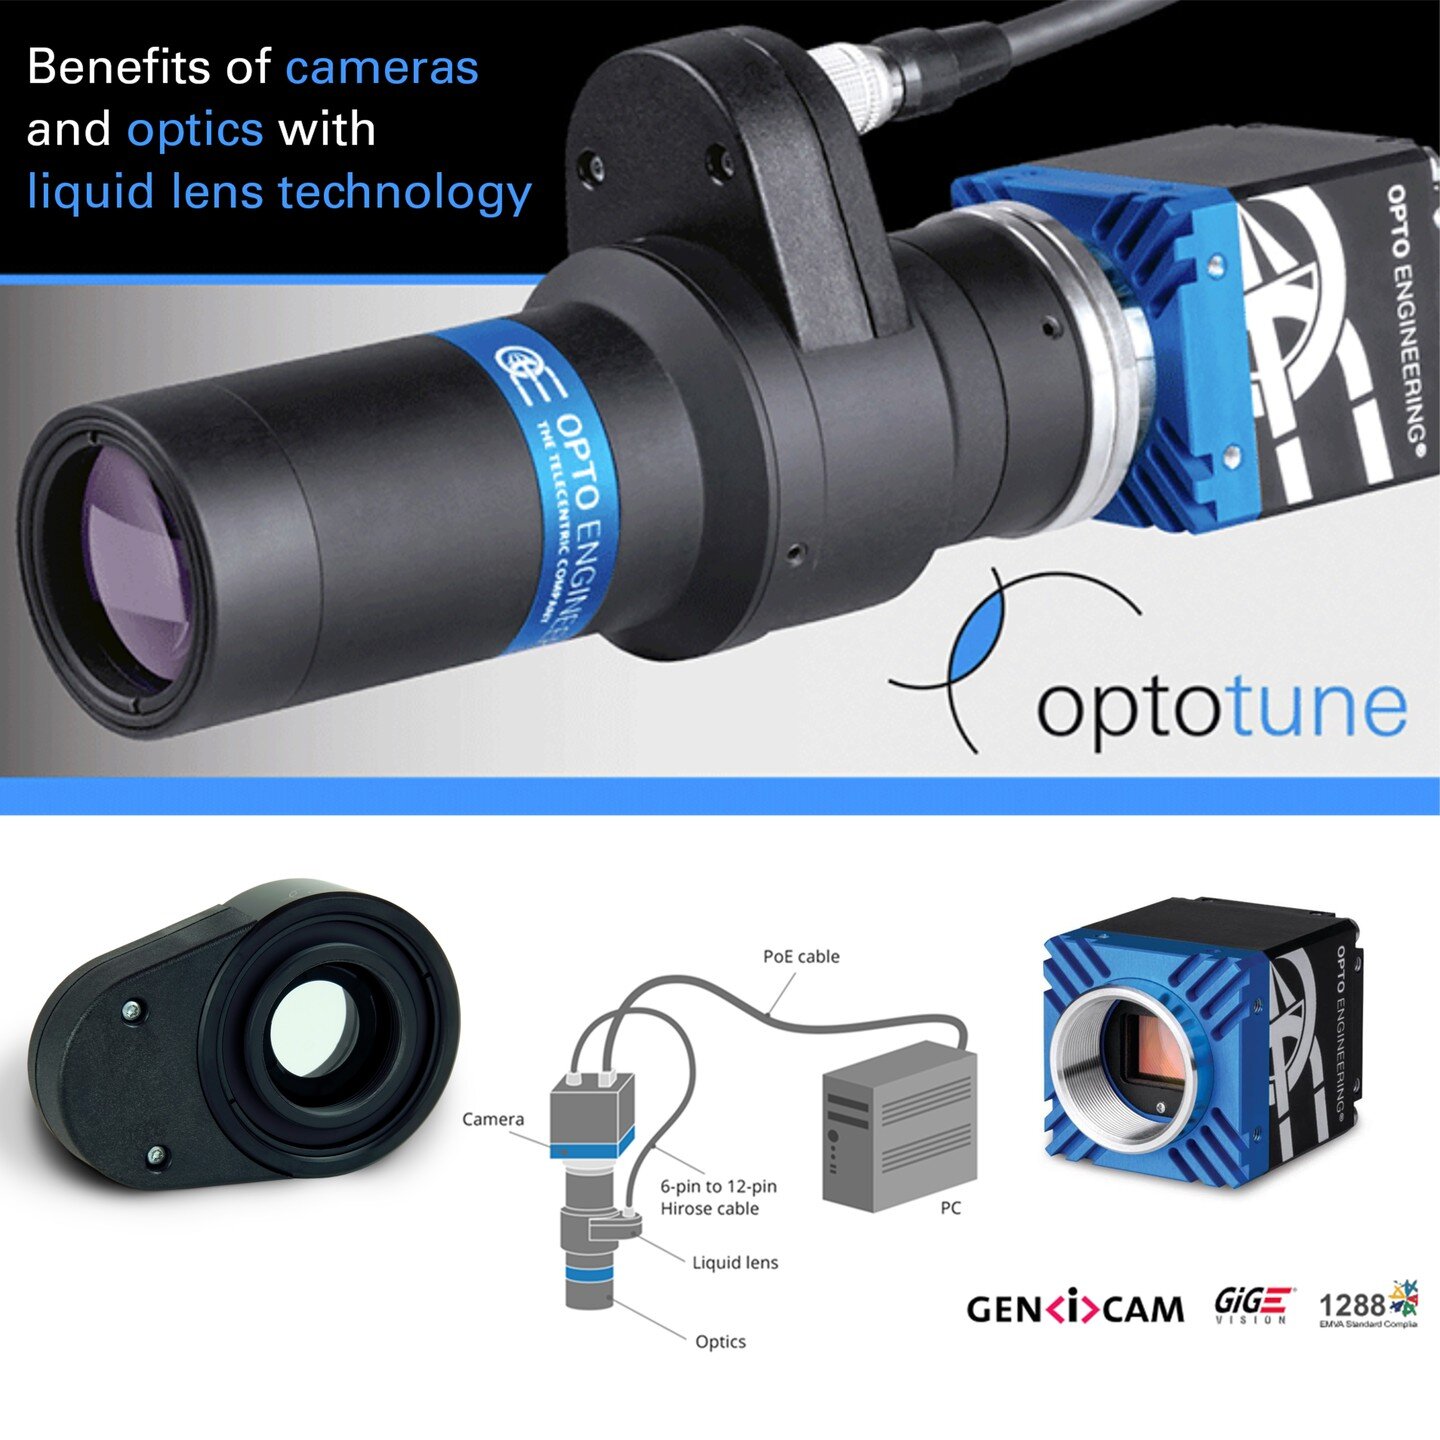 Benefits of cameras and optics with liquid lens technology
 
Last year the GenICam standard was updated to include features for liquid lens control. We are excited to see yet another camera on the market that has implemented this standard and can pro